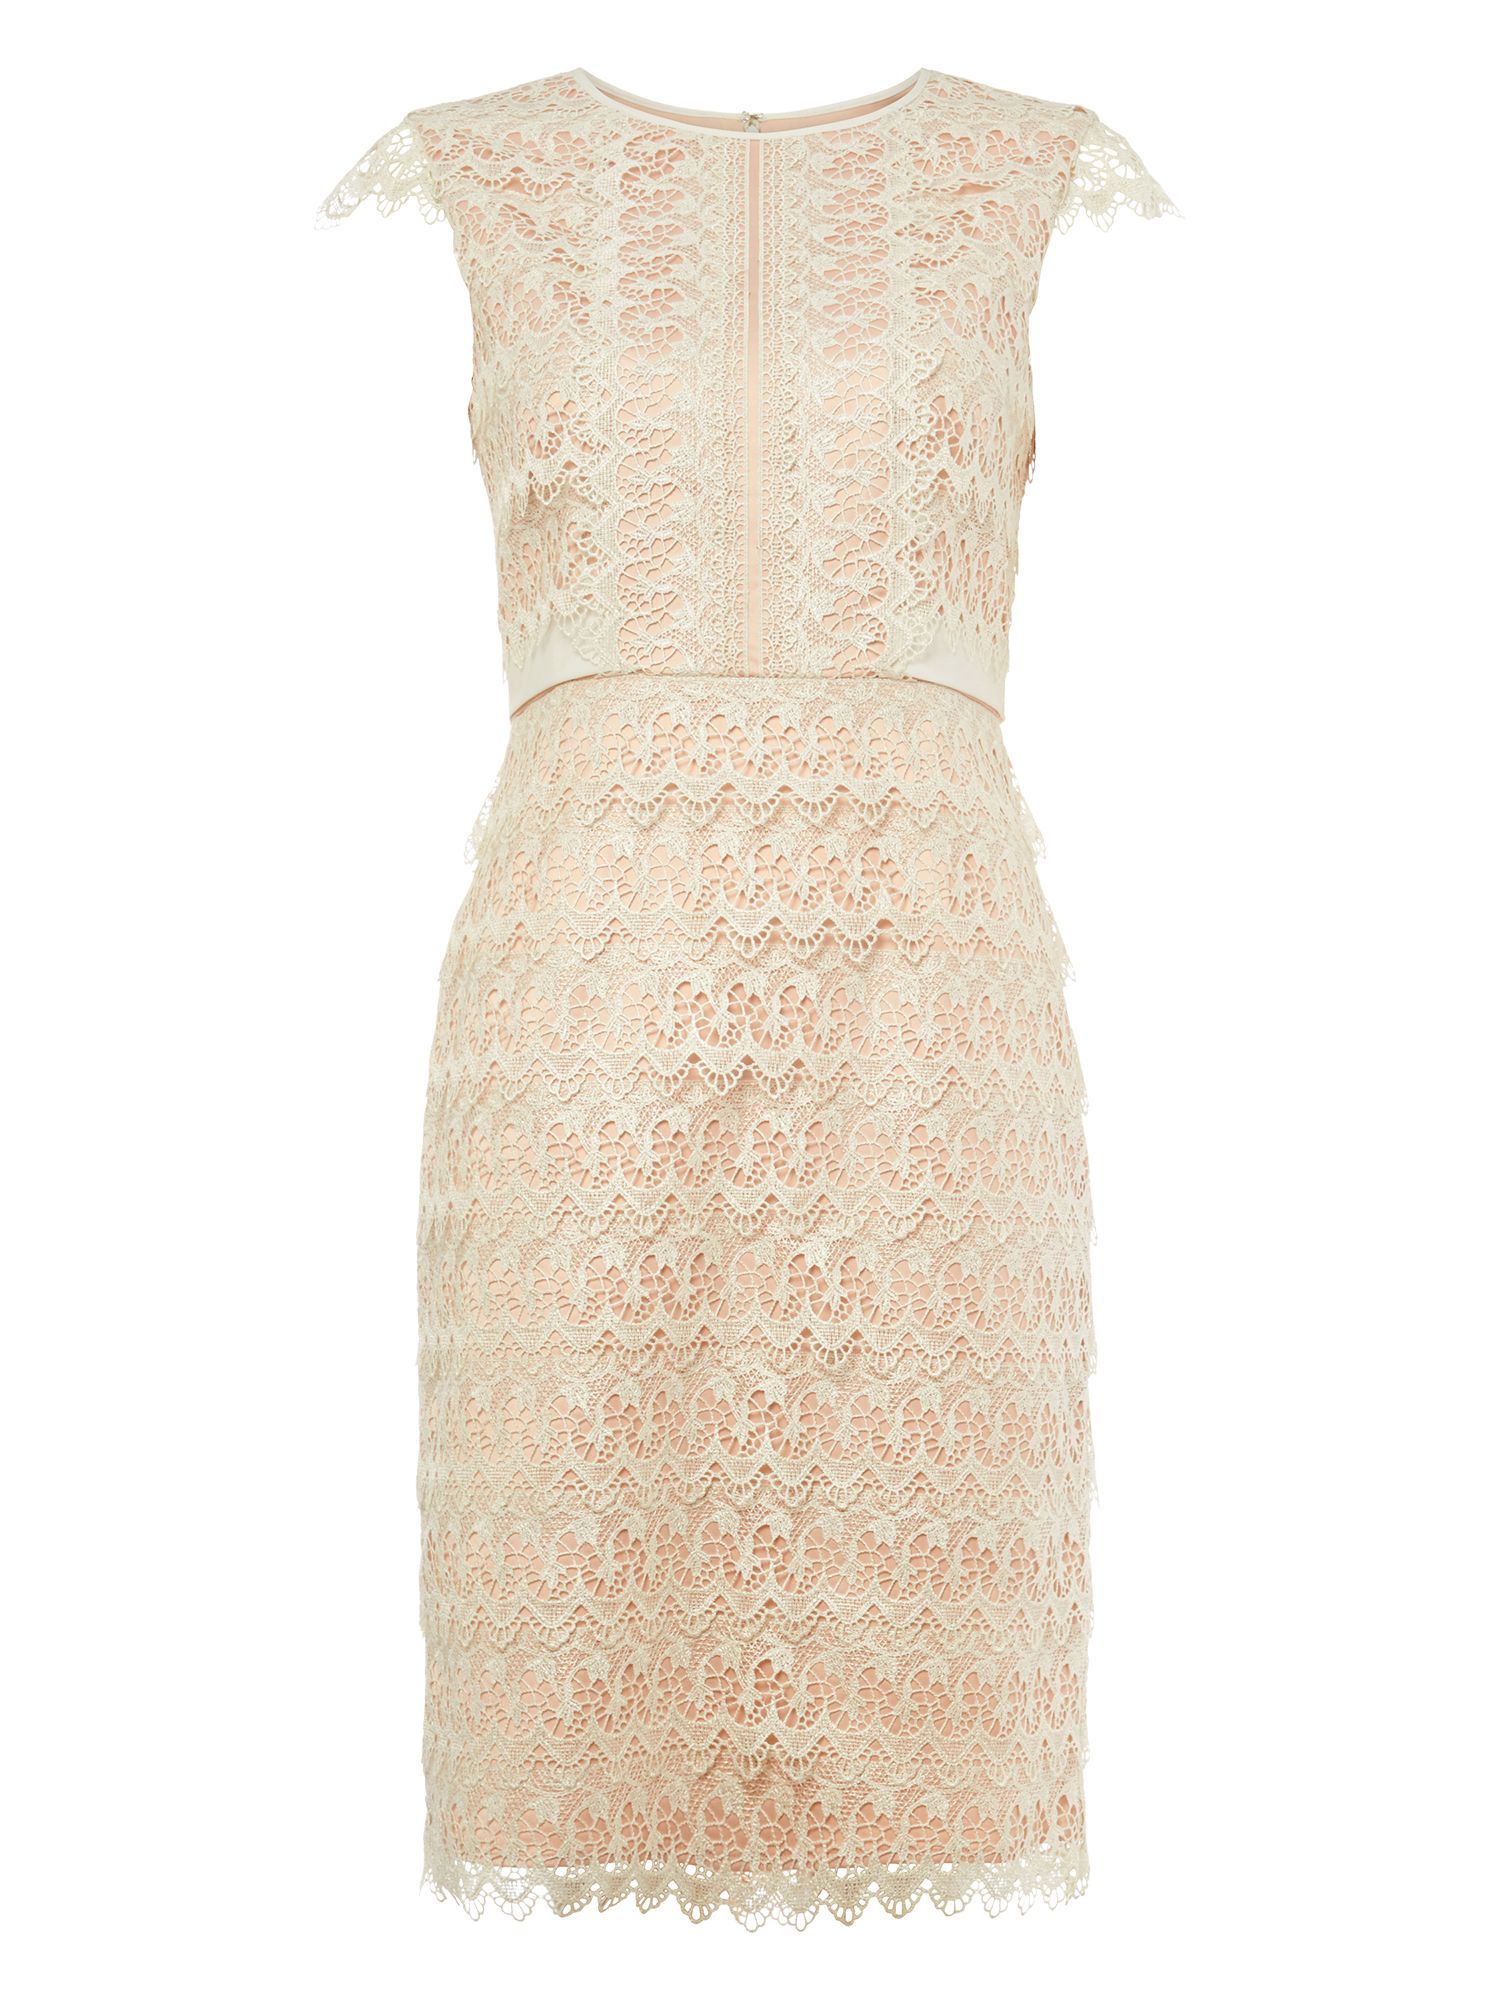 Phase Eight Ally Lace Layered Dress, Cameo/Ivory